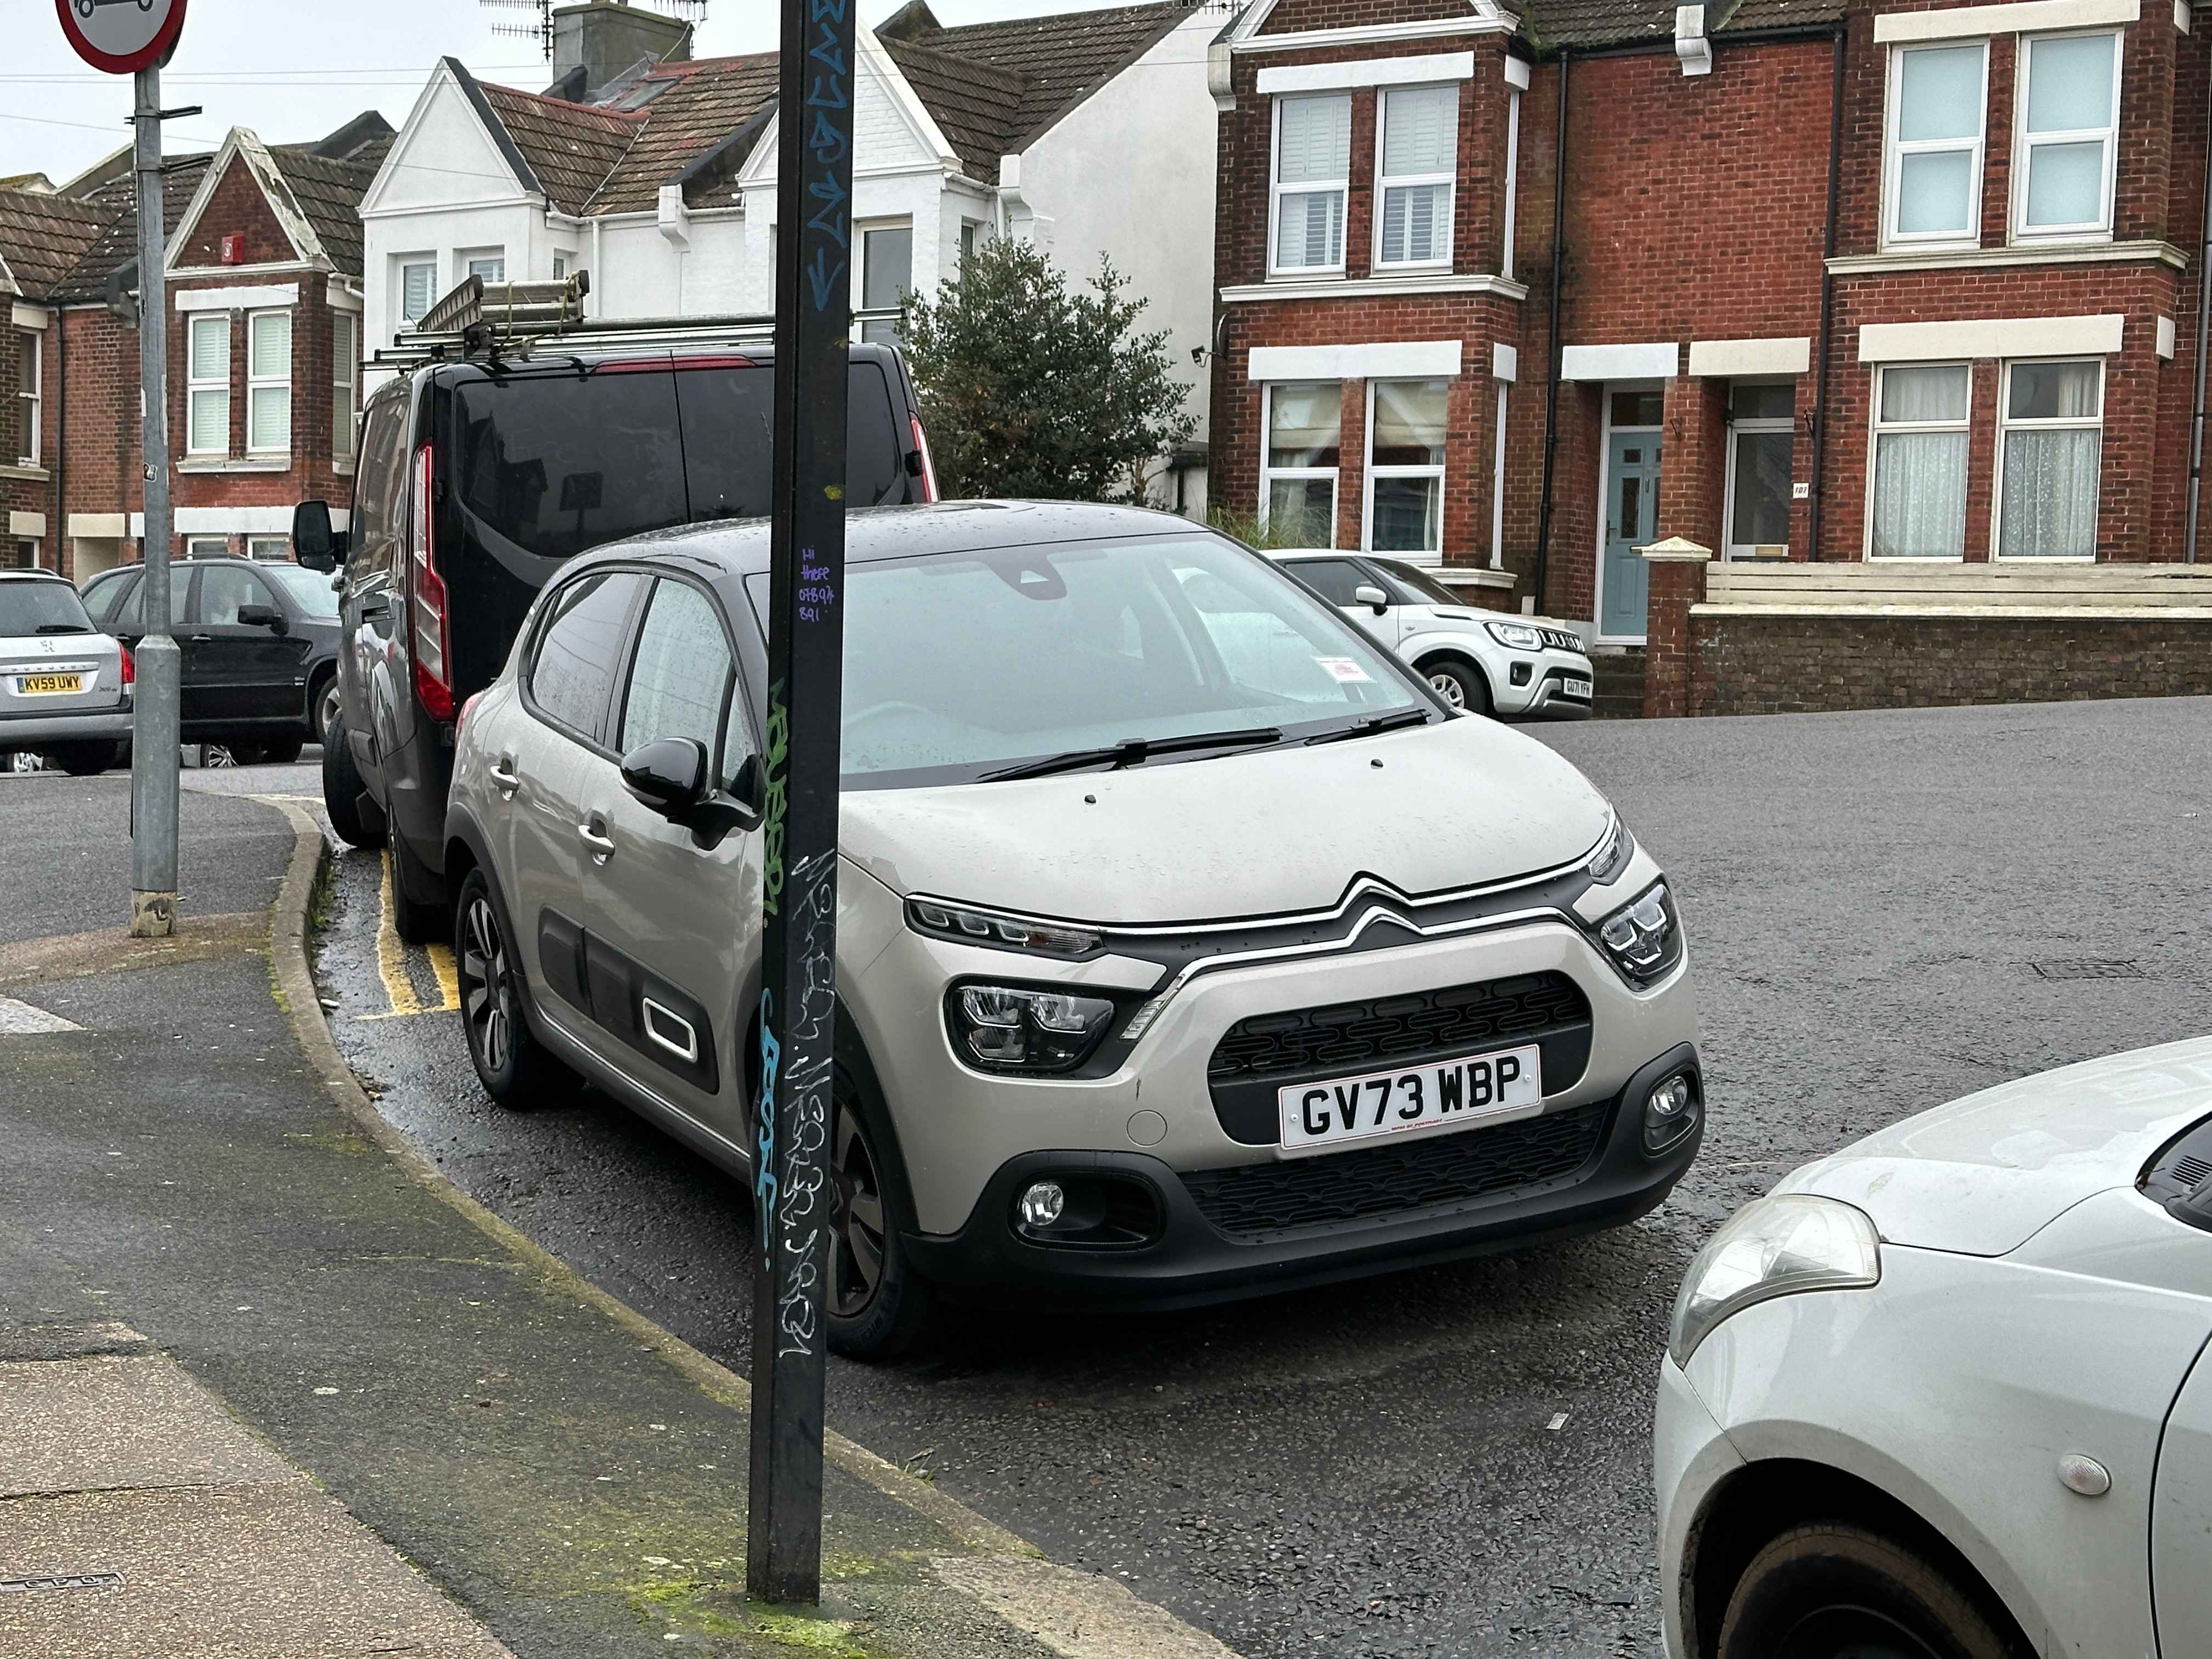 Photograph of GV73 WBP - a Grey Citroen C3 parked in Hollingdean by a non-resident who uses the local area as part of their Brighton commute. The fourth of four photographs supplied by the residents of Hollingdean.